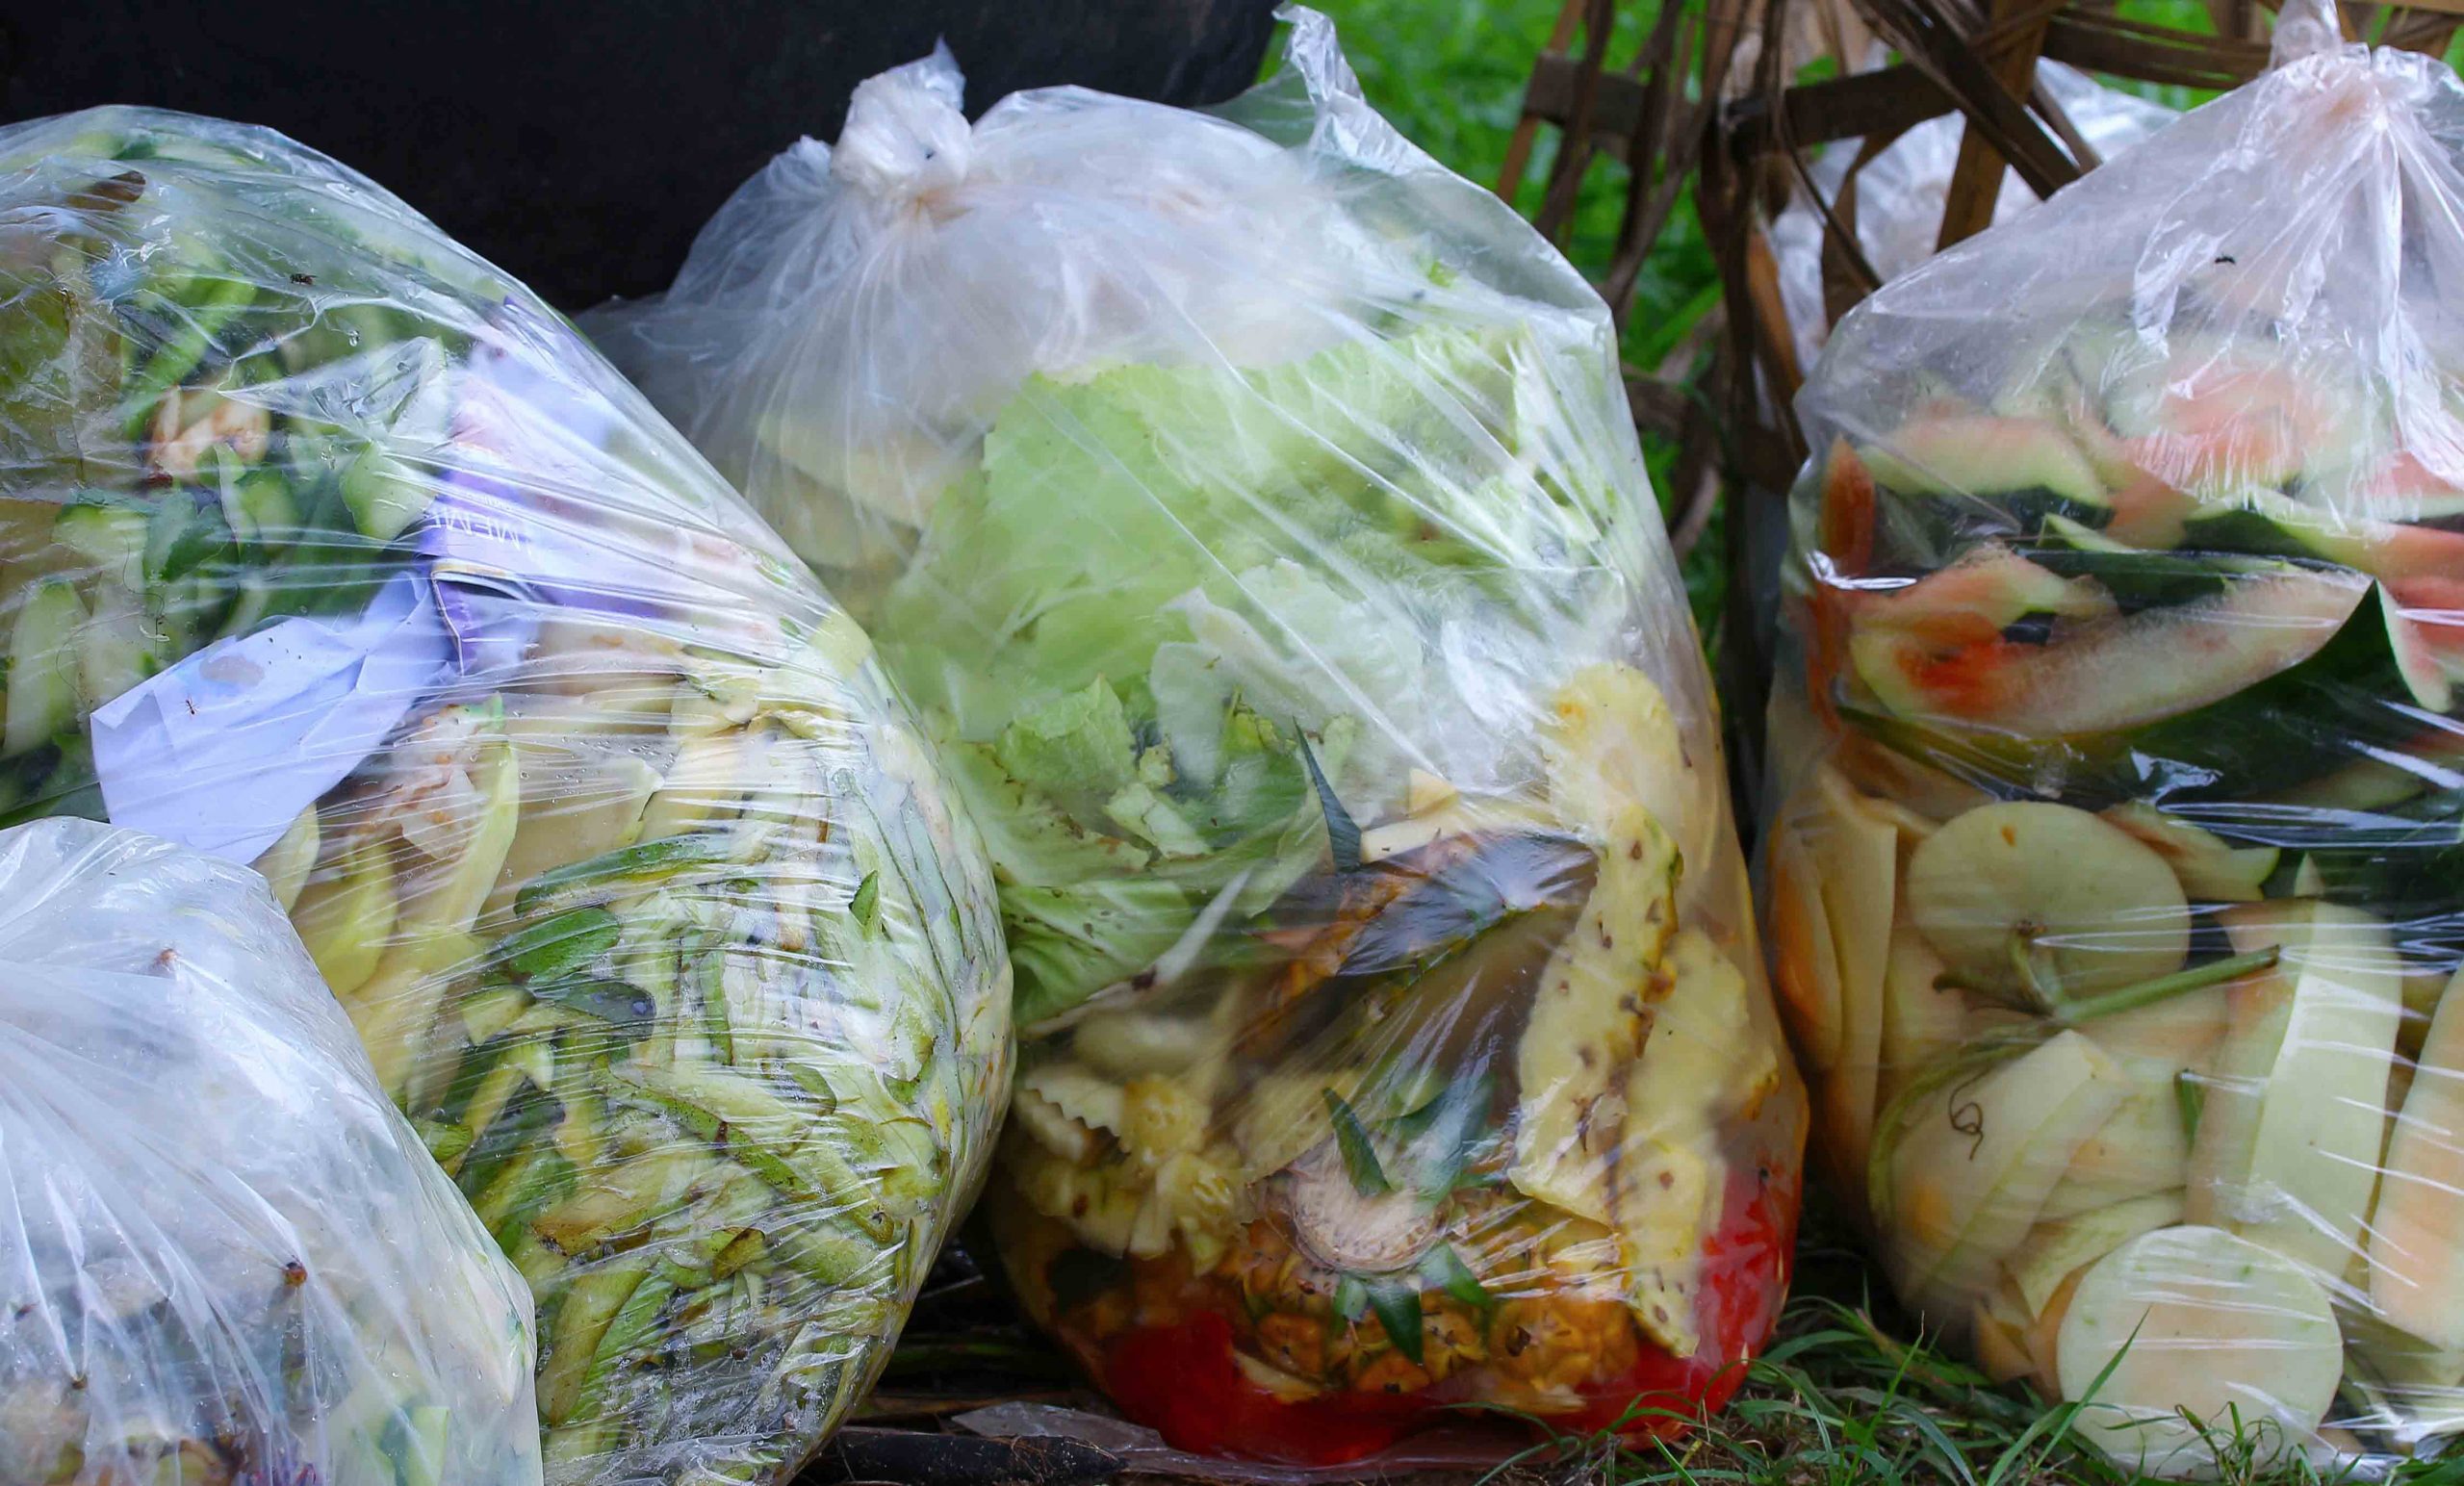 What are cities doing about food waste? - Recycle Track Systems